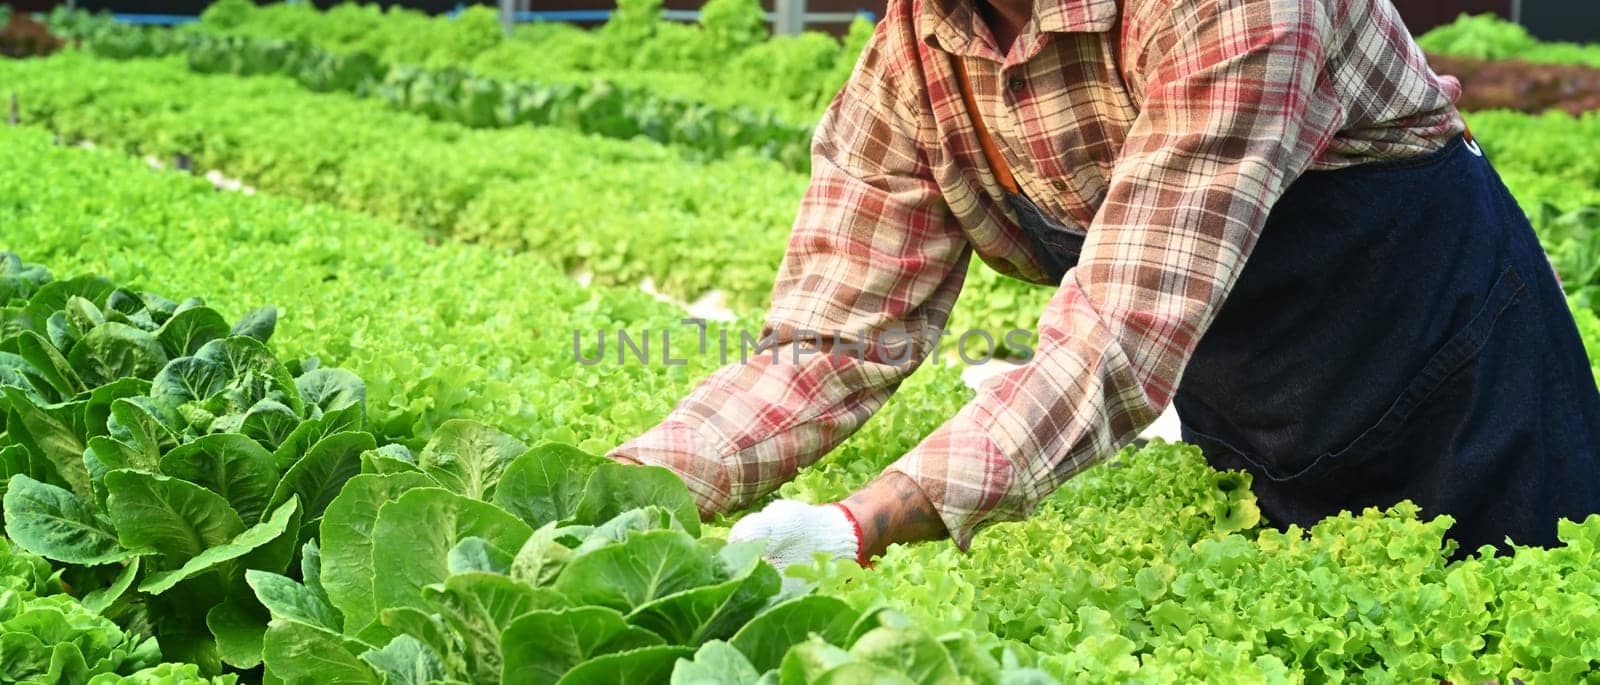 Cropped image of farmer working, arranging, sorting organic vegetables in sunny hydroponic greenhouse.